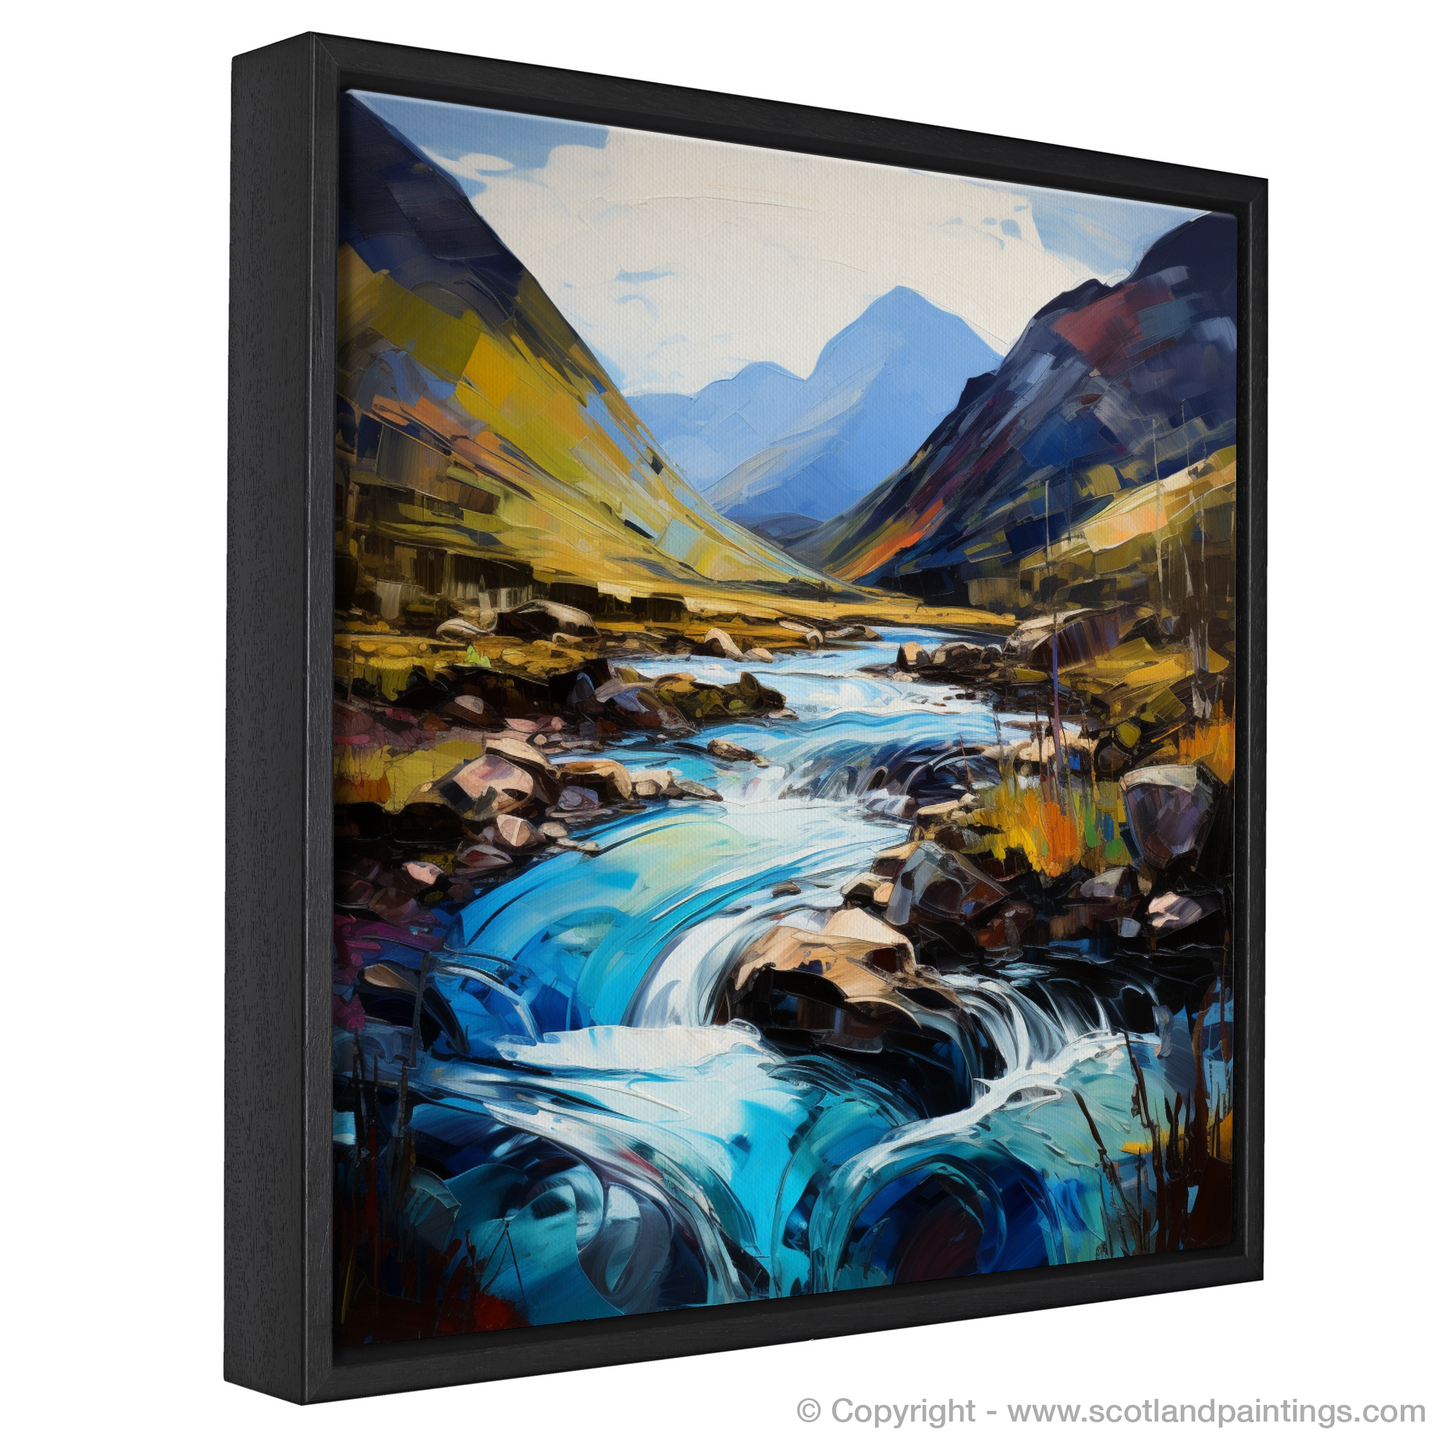 Painting and Art Print of River Coe, Glencoe, Highlands entitled "Whispers of Glencoe: An Expressionist Ode to River Coe".